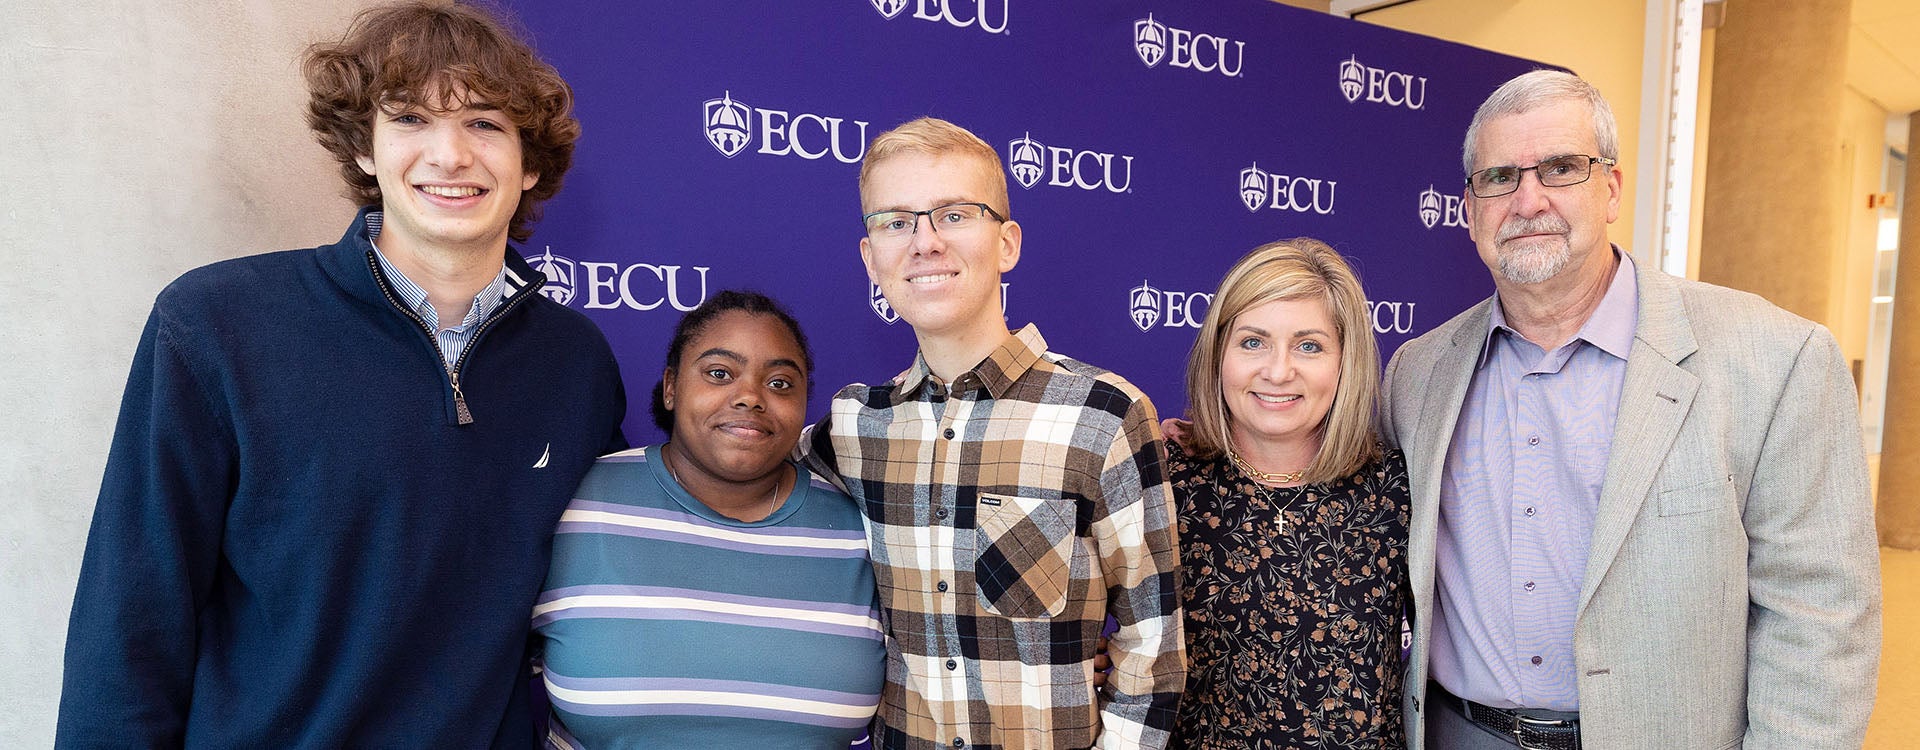 Bradly Boaz, from left, and Krysta Byrd were recognized for their efforts to help Blake Solomonson during a medical emergency. Solomonson and his parents, Becky and Rich Belthoff, attended a recognition ceremony for Boaz and Byrd at ECU’s Main Campus Student Center.